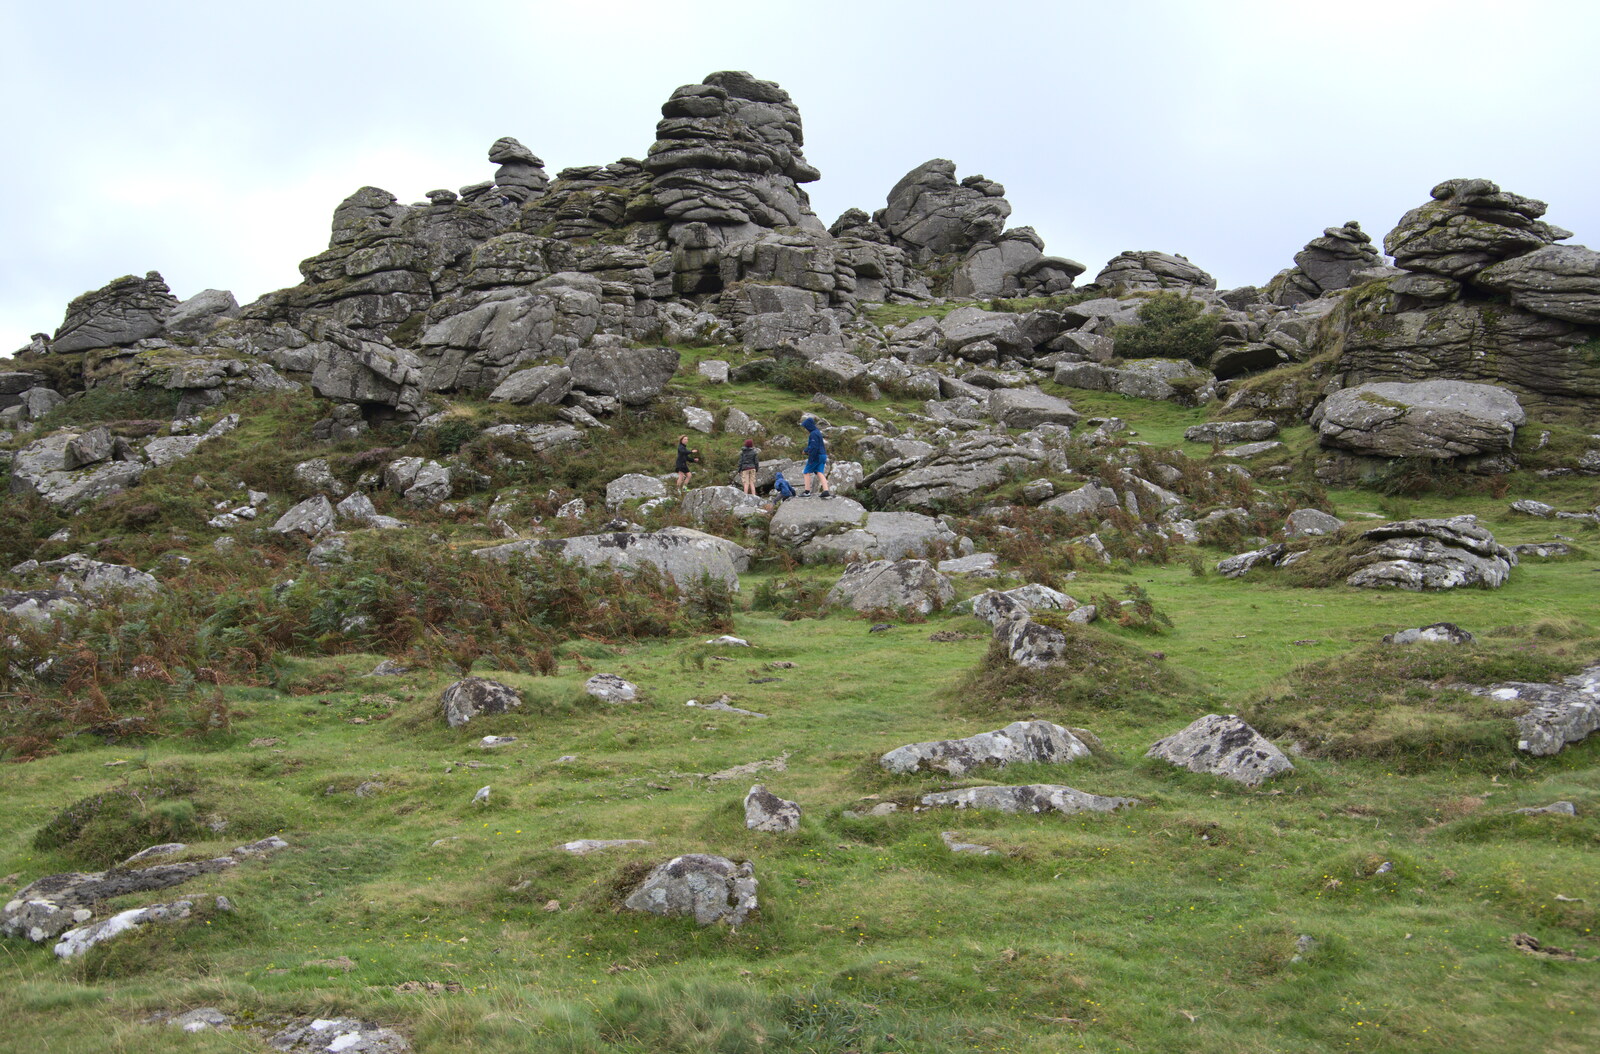 The boys head off into the rocks from A Walk up Hound Tor, Dartmoor, Devon - 24th August 2020